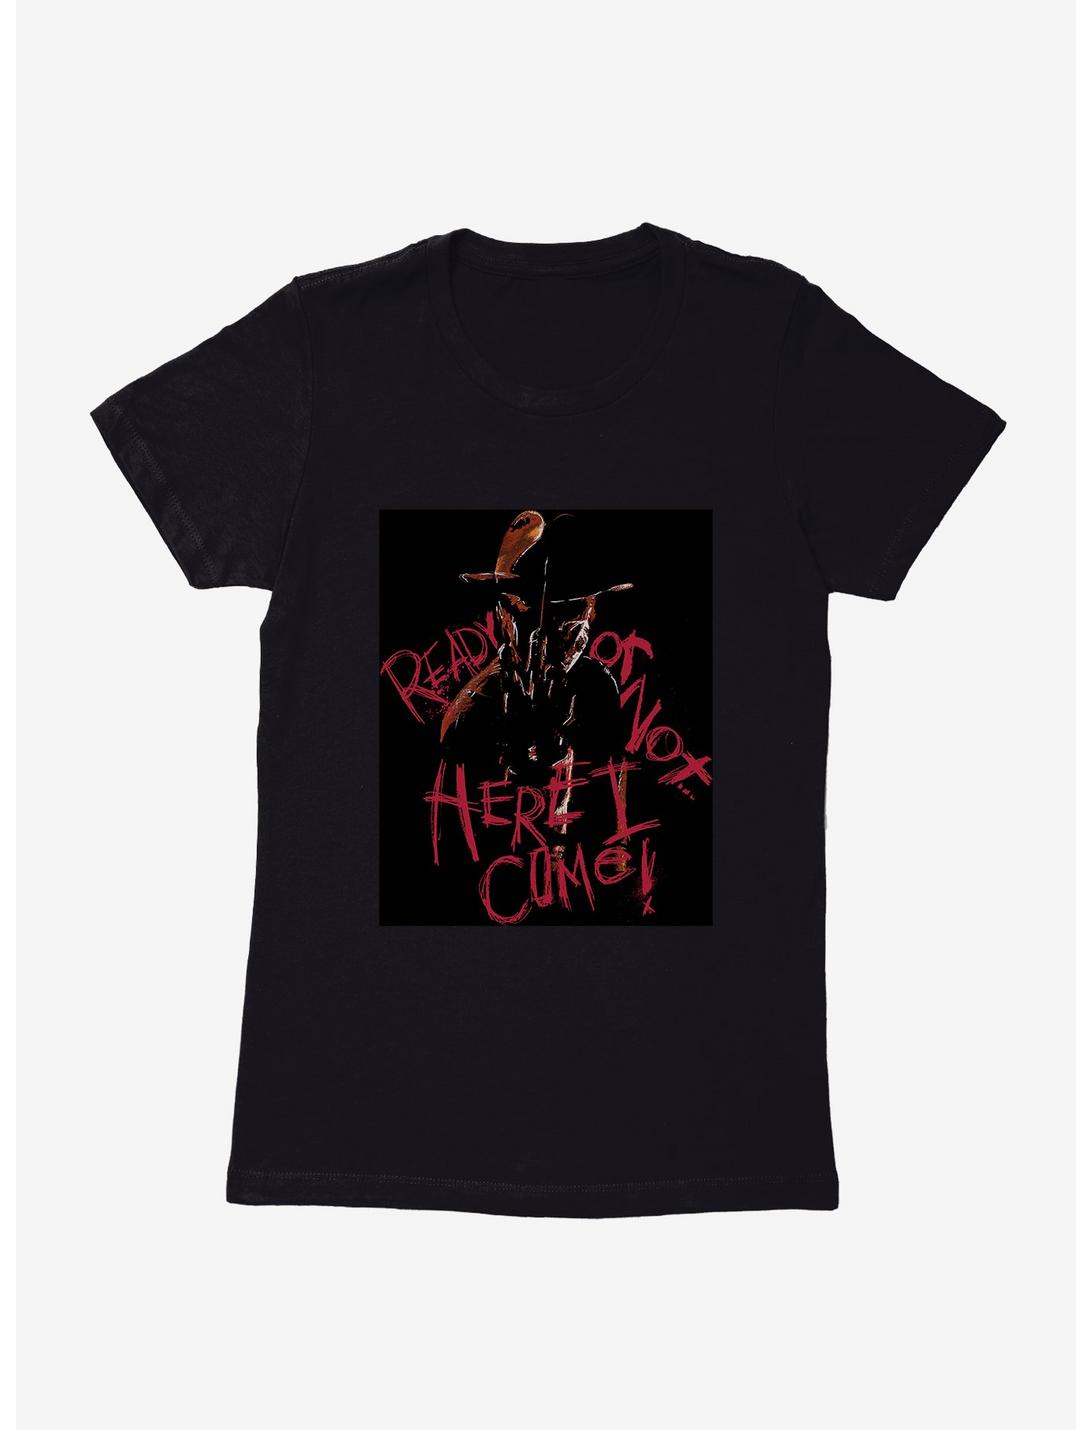 A Nightmare On Elm Street Ready Or Not Womens T-Shirt, BLACK, hi-res